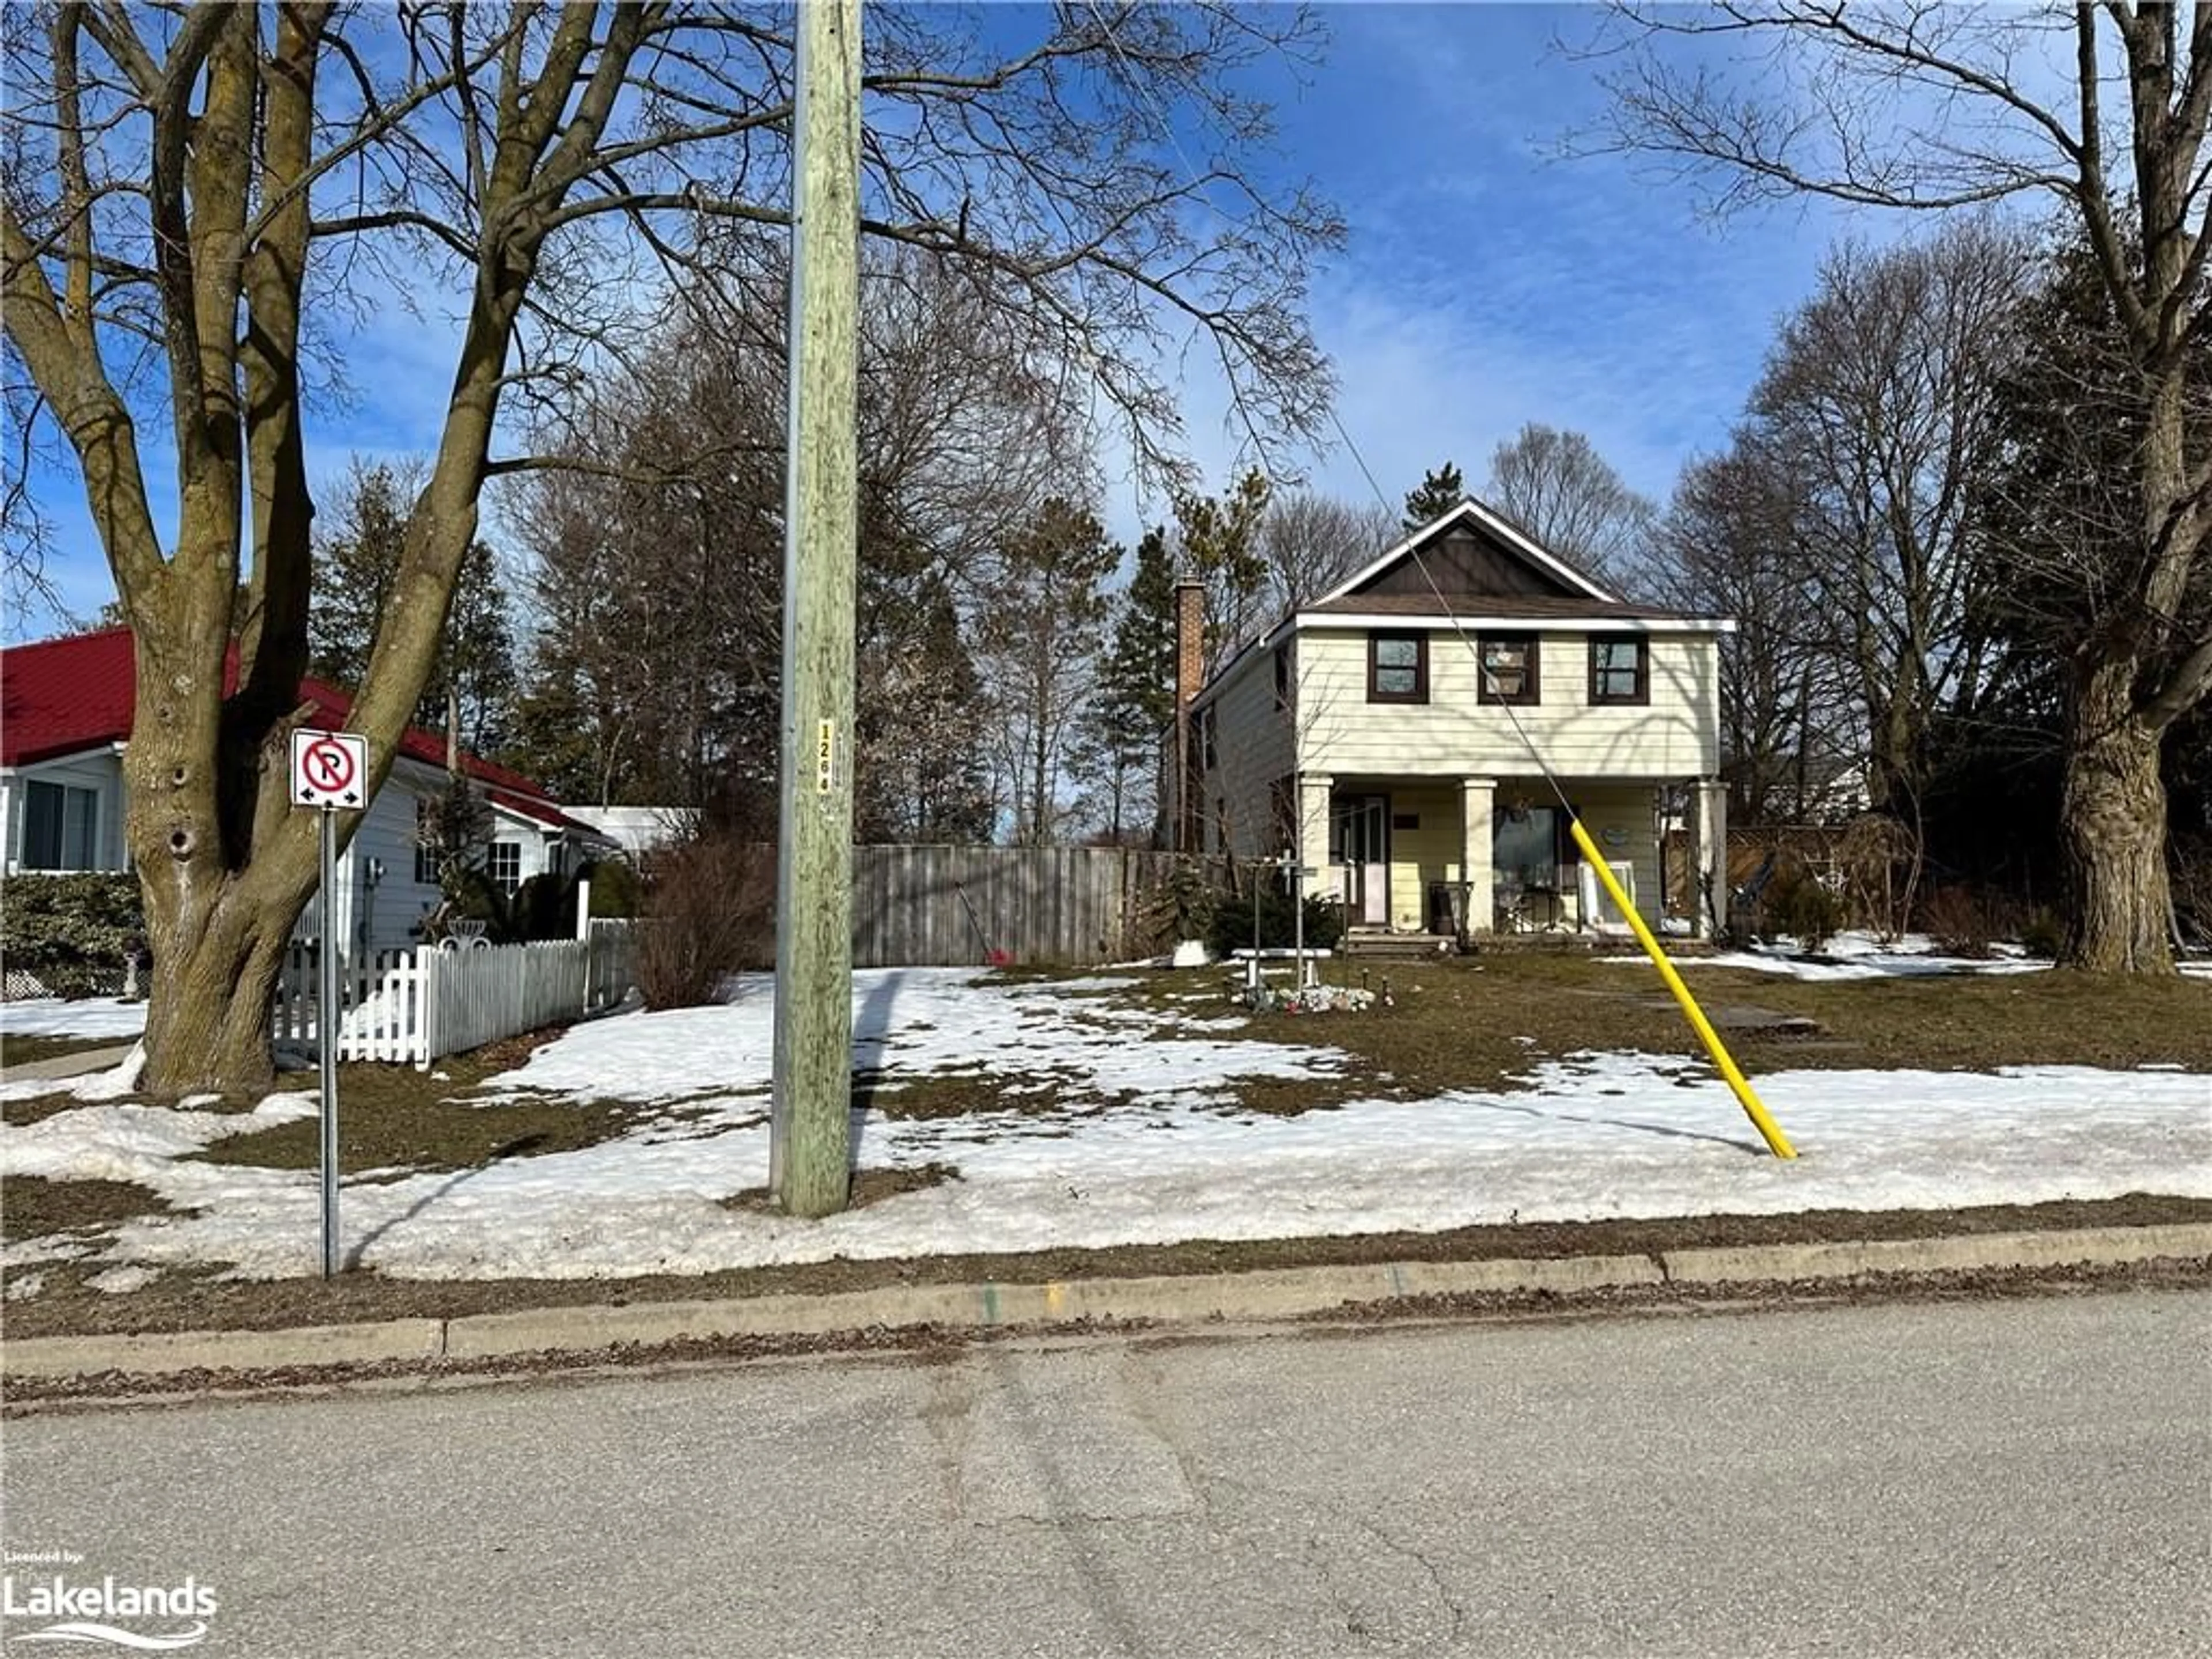 Street view for 238 Spence St, Southampton Ontario N0H 2L0